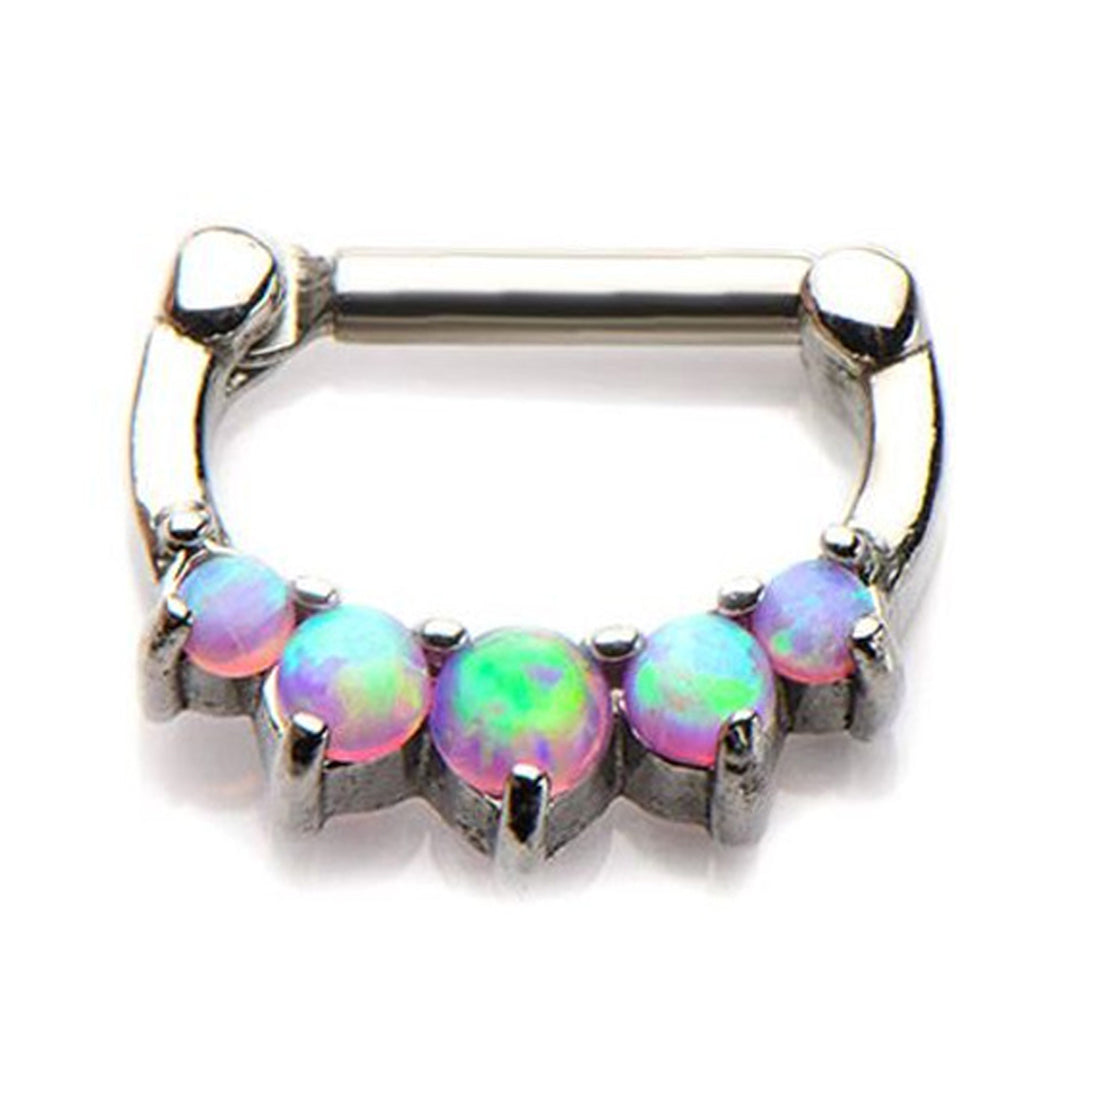 Surgical Steel Hinged Clicker Segment Septum Ring 16 Gauge With 5 Opal